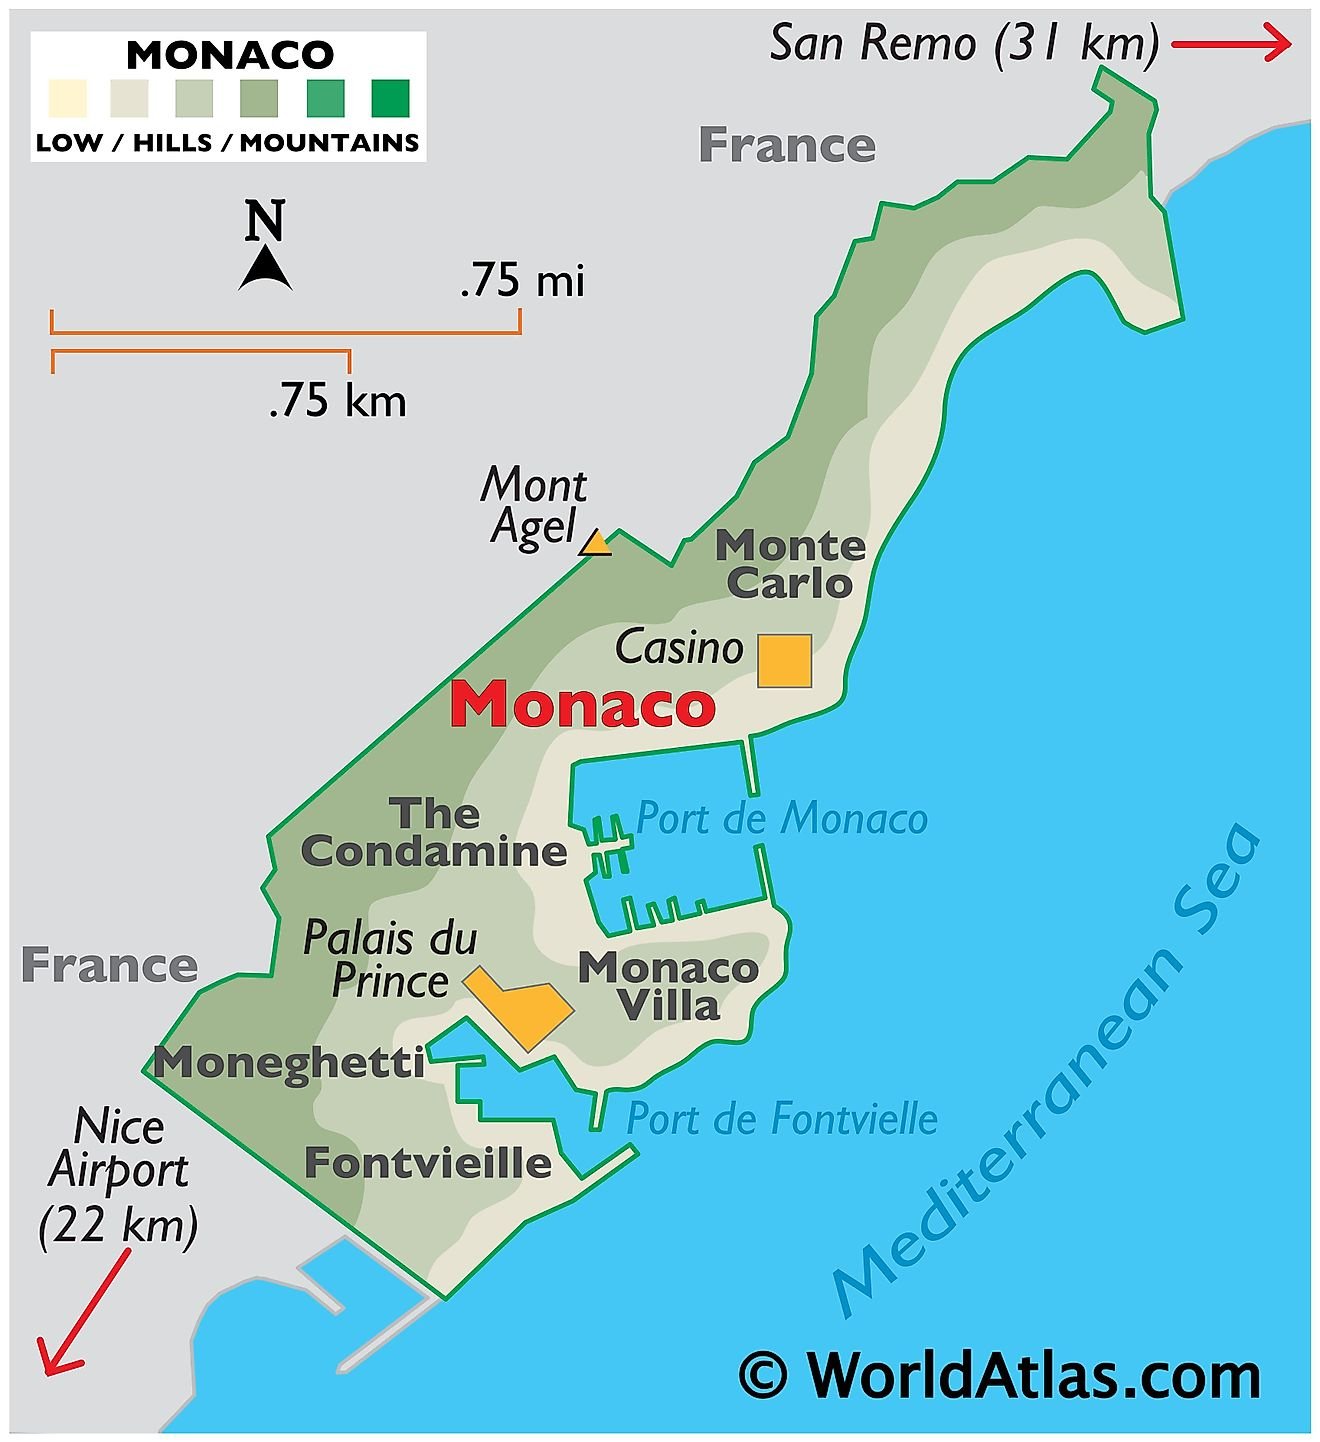 City-state Monaco has the highest life expectancy in the world